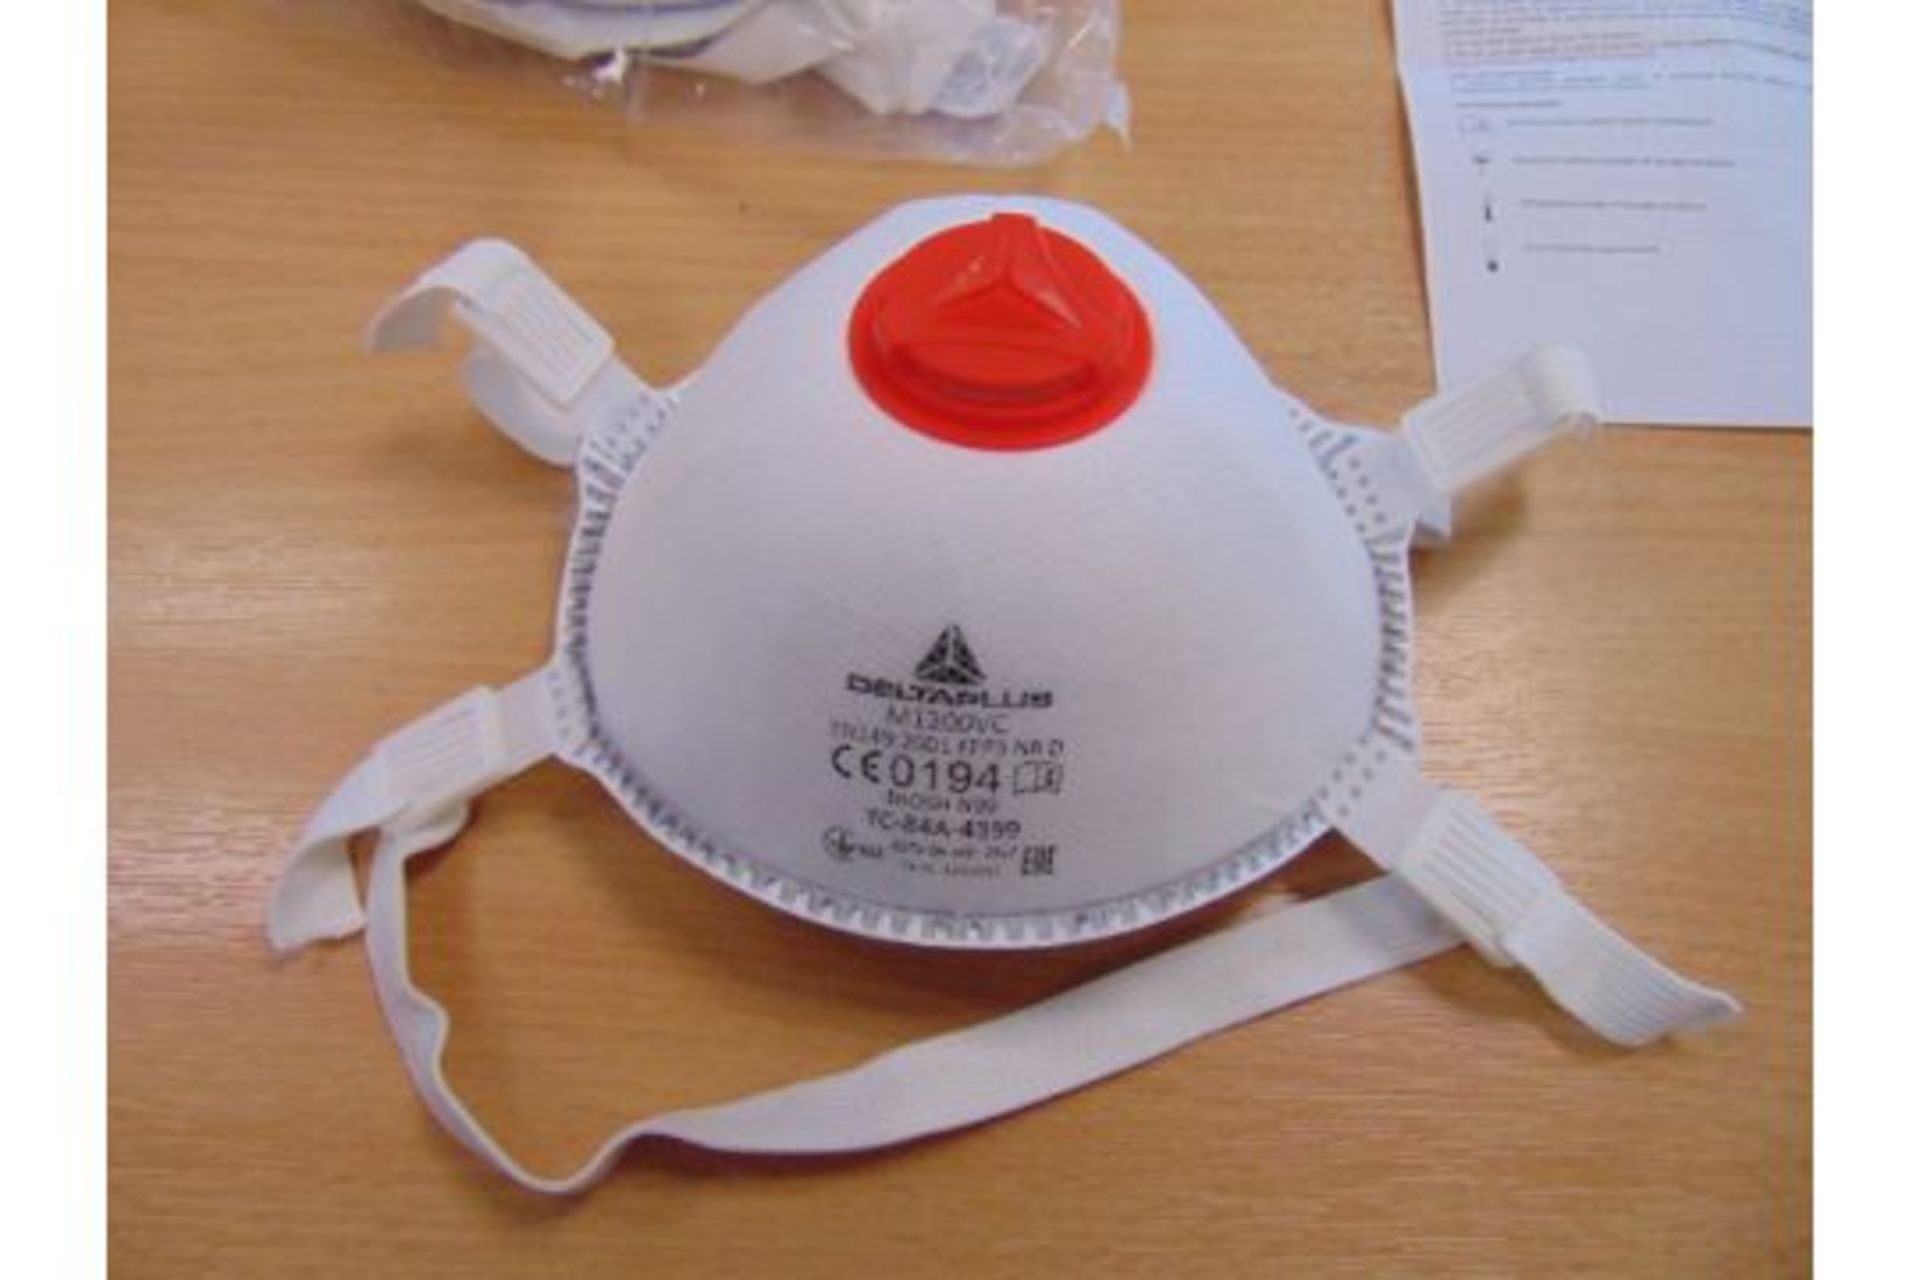 QTY 200 New Unused Delta Plus Dust Masks High Quality with Valve, MoD Reserve Stock - Image 3 of 10